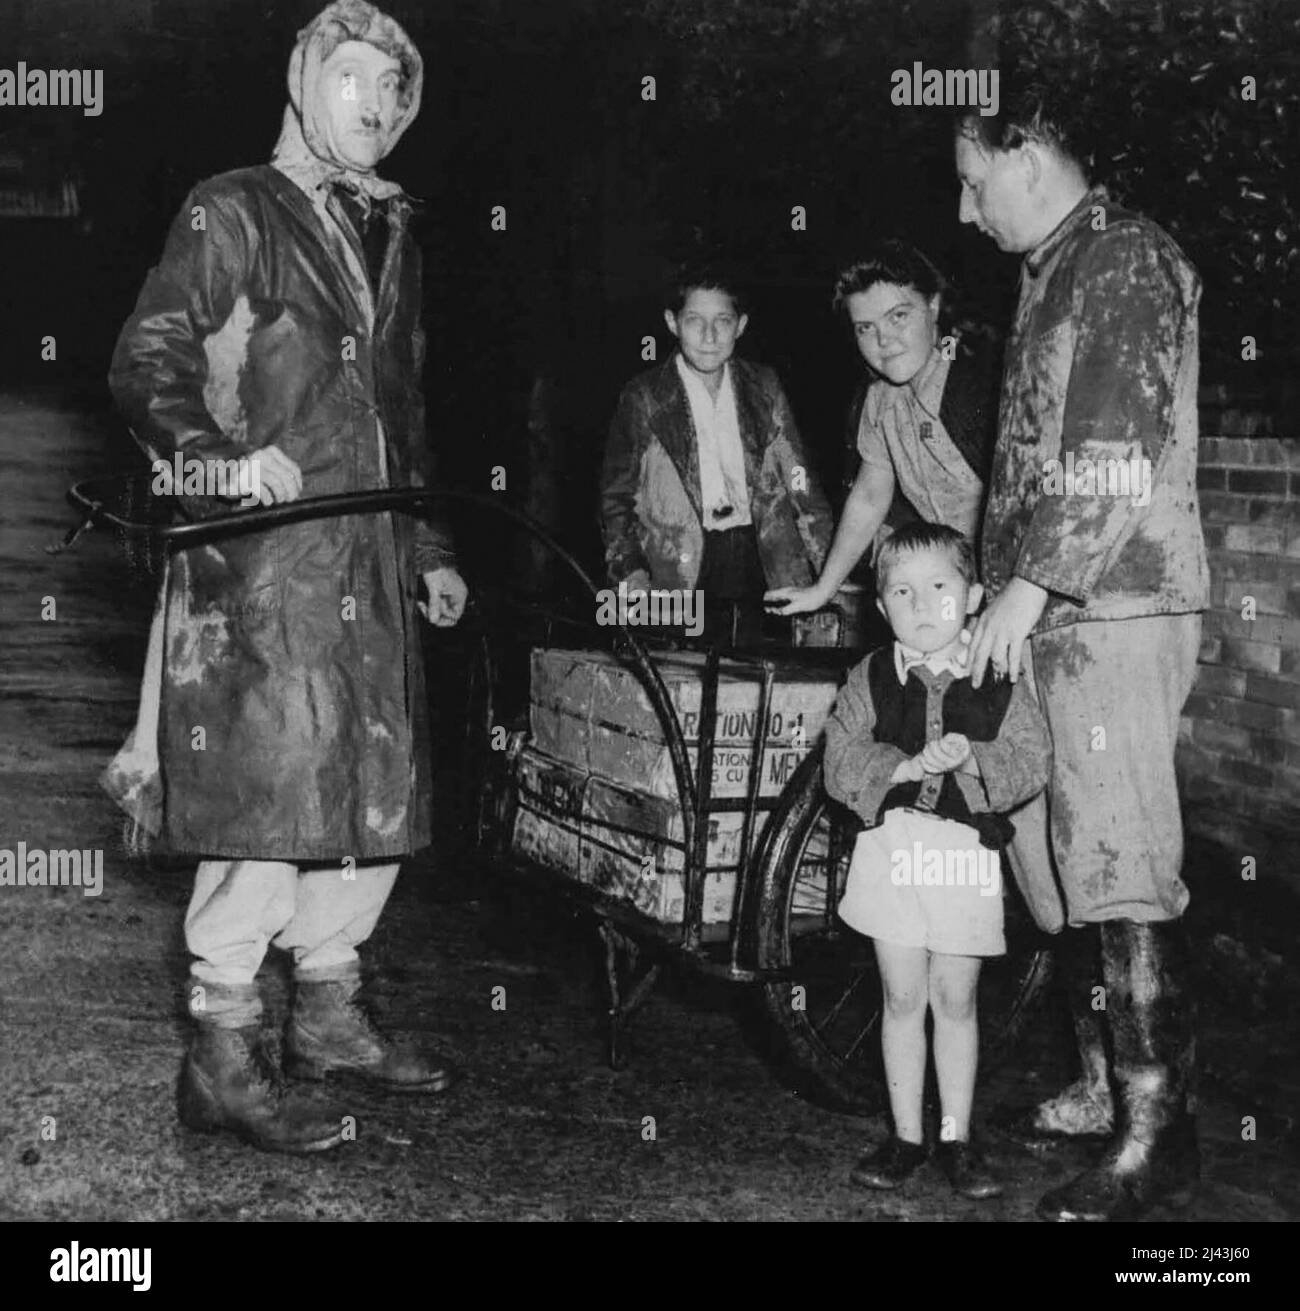 The family pictured above has just received allotment being issued by the ***** Army ***** allied and ***** objects in the international settlement of Kobe, Japan. October 01, 1945. Stock Photo